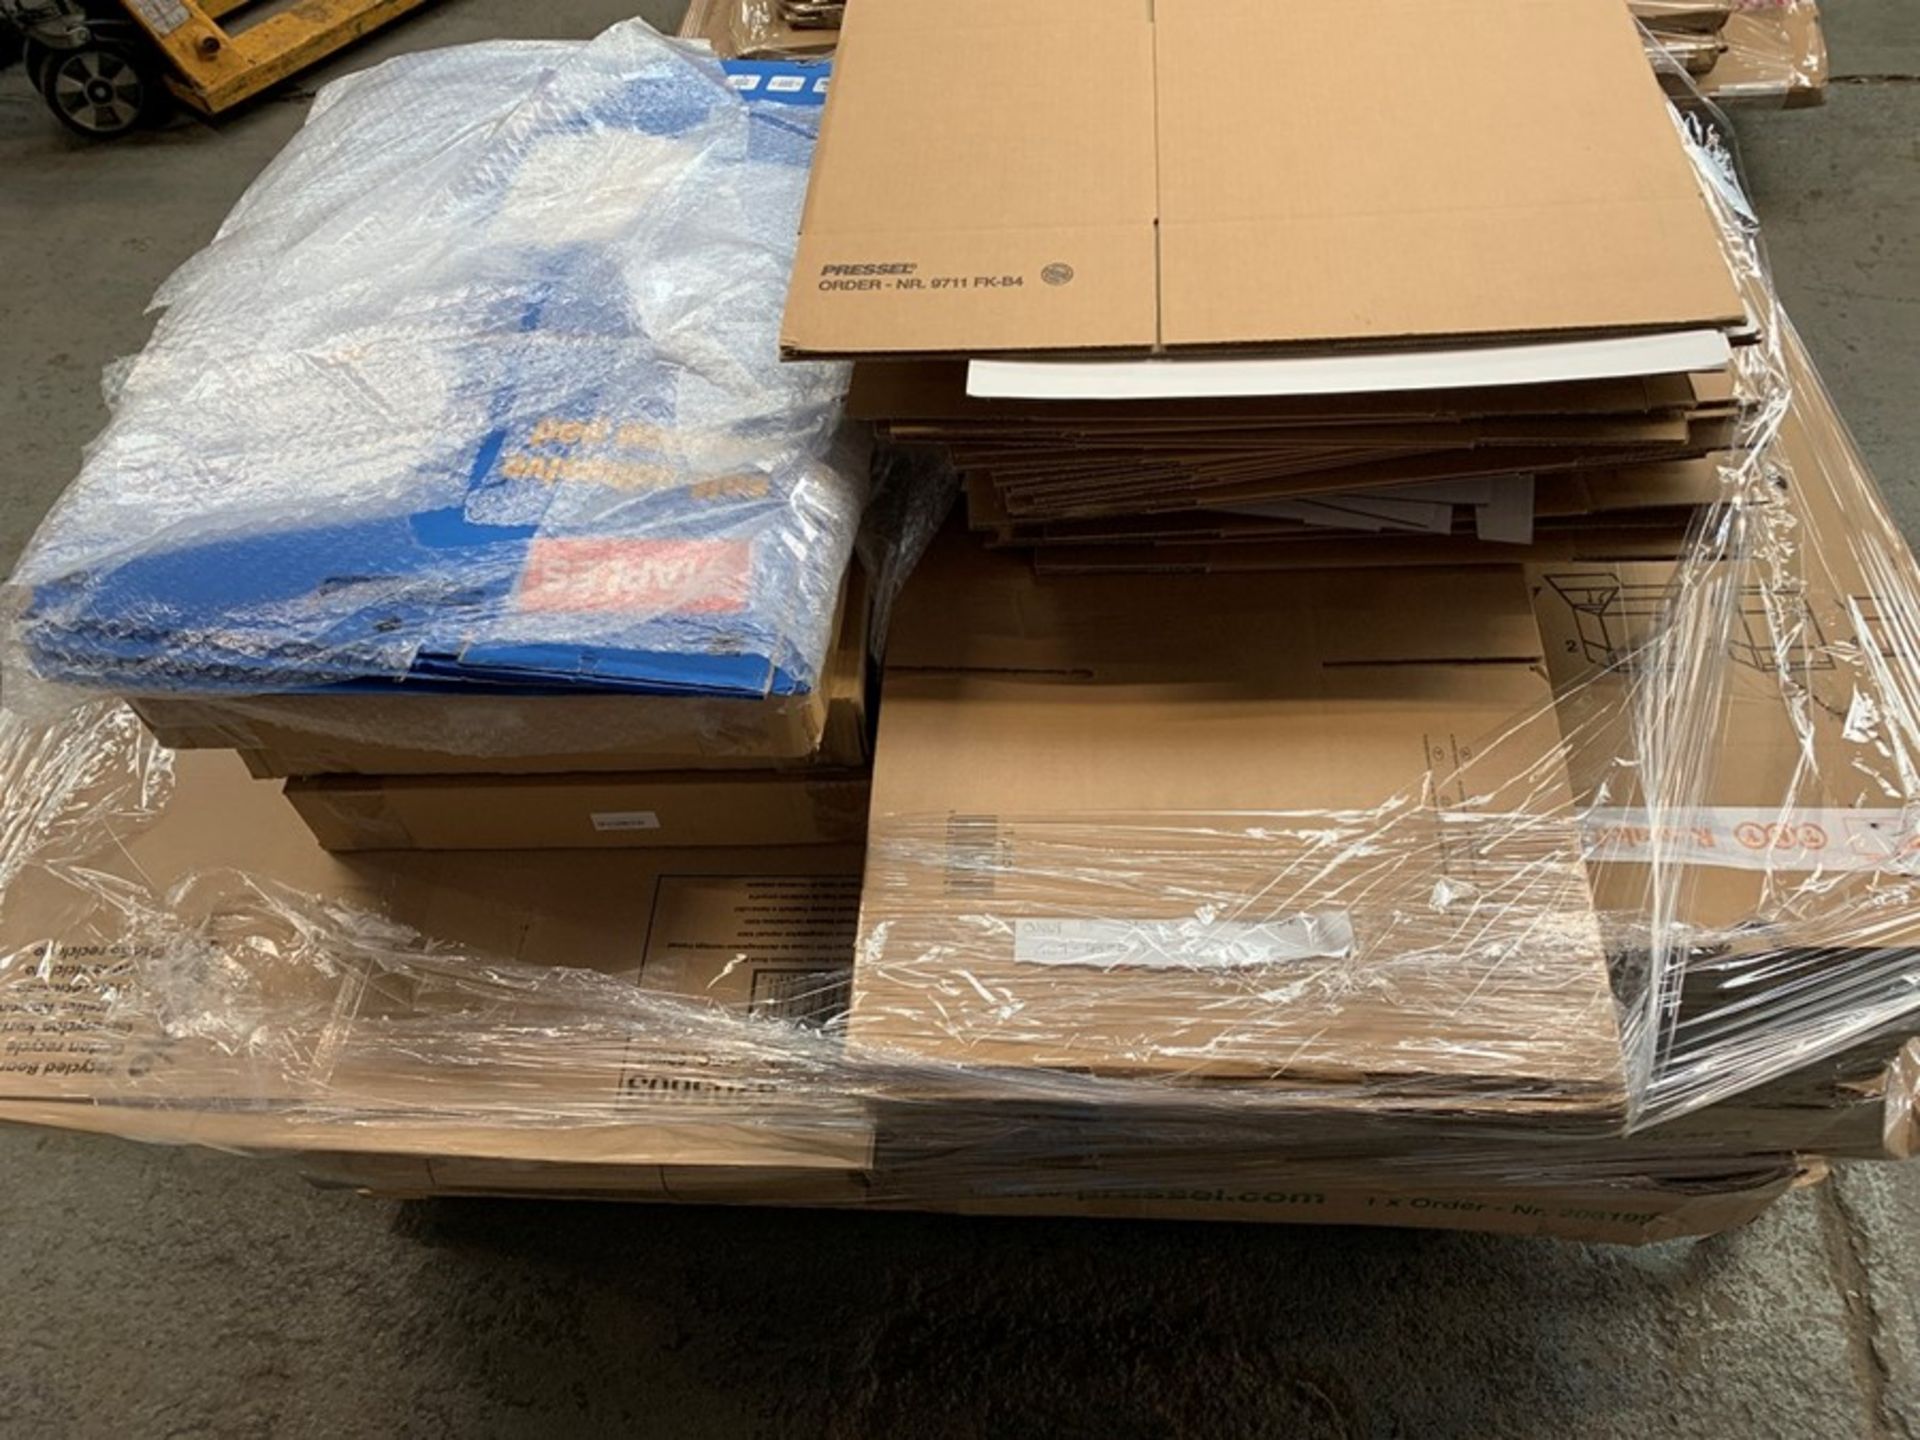 1 LOT TO CONTAIN ASSORTED CARDBOARD BOXES / SIZES, COLOURS AND CONDITIONS VARY / PN - 177 (PUBLIC